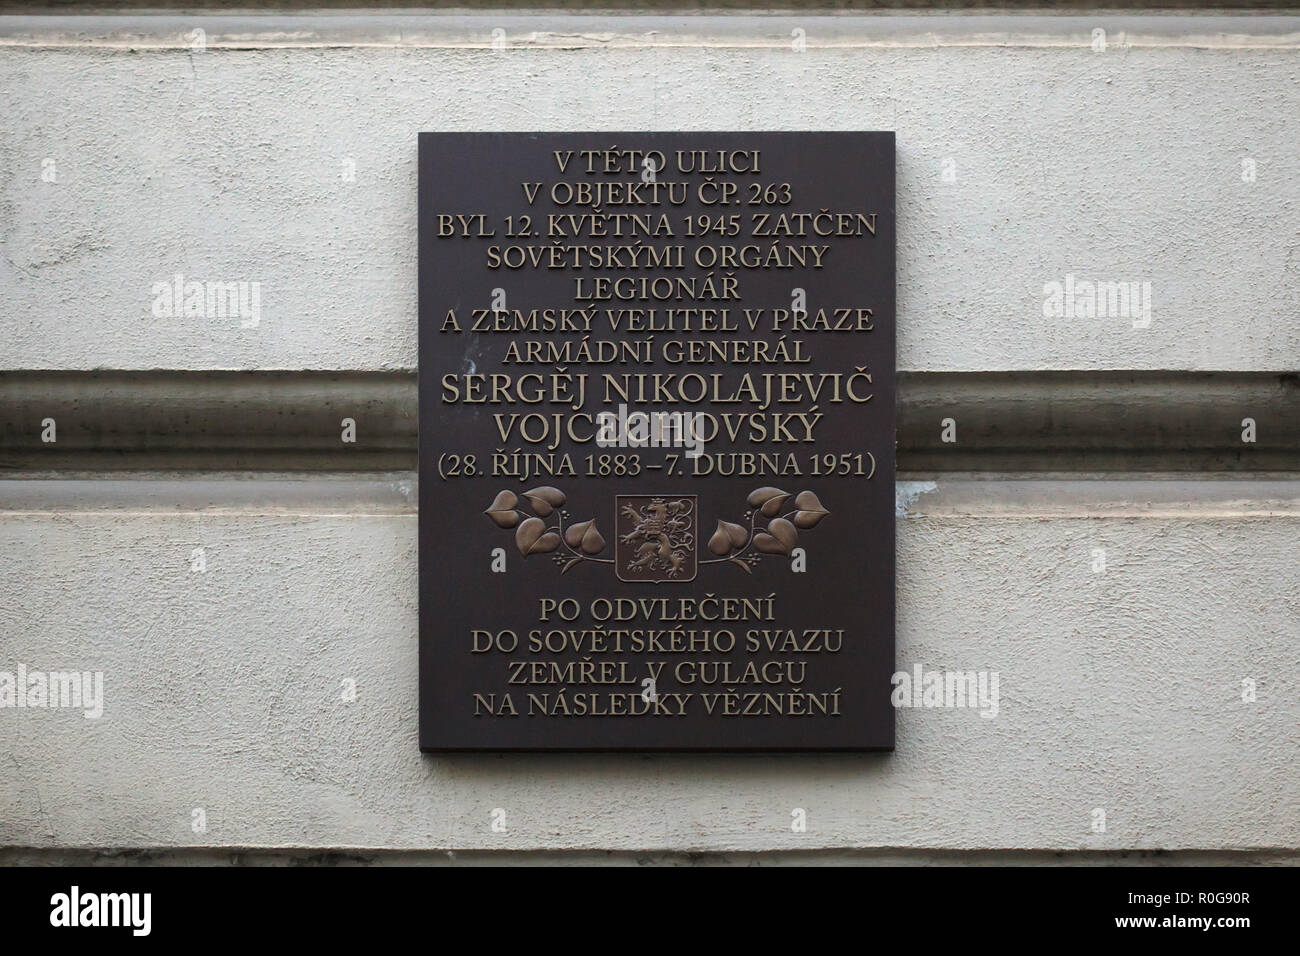 Commemorative plaque next to the house where Czechoslovak general Sergej Vojcechovský (Sergei Wojciechowski) was arrested by the SMERSH on 12 May 1945 in Konviktská Street in Prague, Czech Republic. Sergej Vojcechovský was a military commander in the White Army during the Russian Civil War and then lived in exile in Czechoslovakia and served in the Czechoslovak Army. He was arrested by the SMERSH (Soviet military counterintelligence service) and sent to Moscow shortly after the Red Army liberated Prague in May 1945. He died in prison on 7 April 1951 in the Ozerlag Labour Camp of the Gulag in T Stock Photo